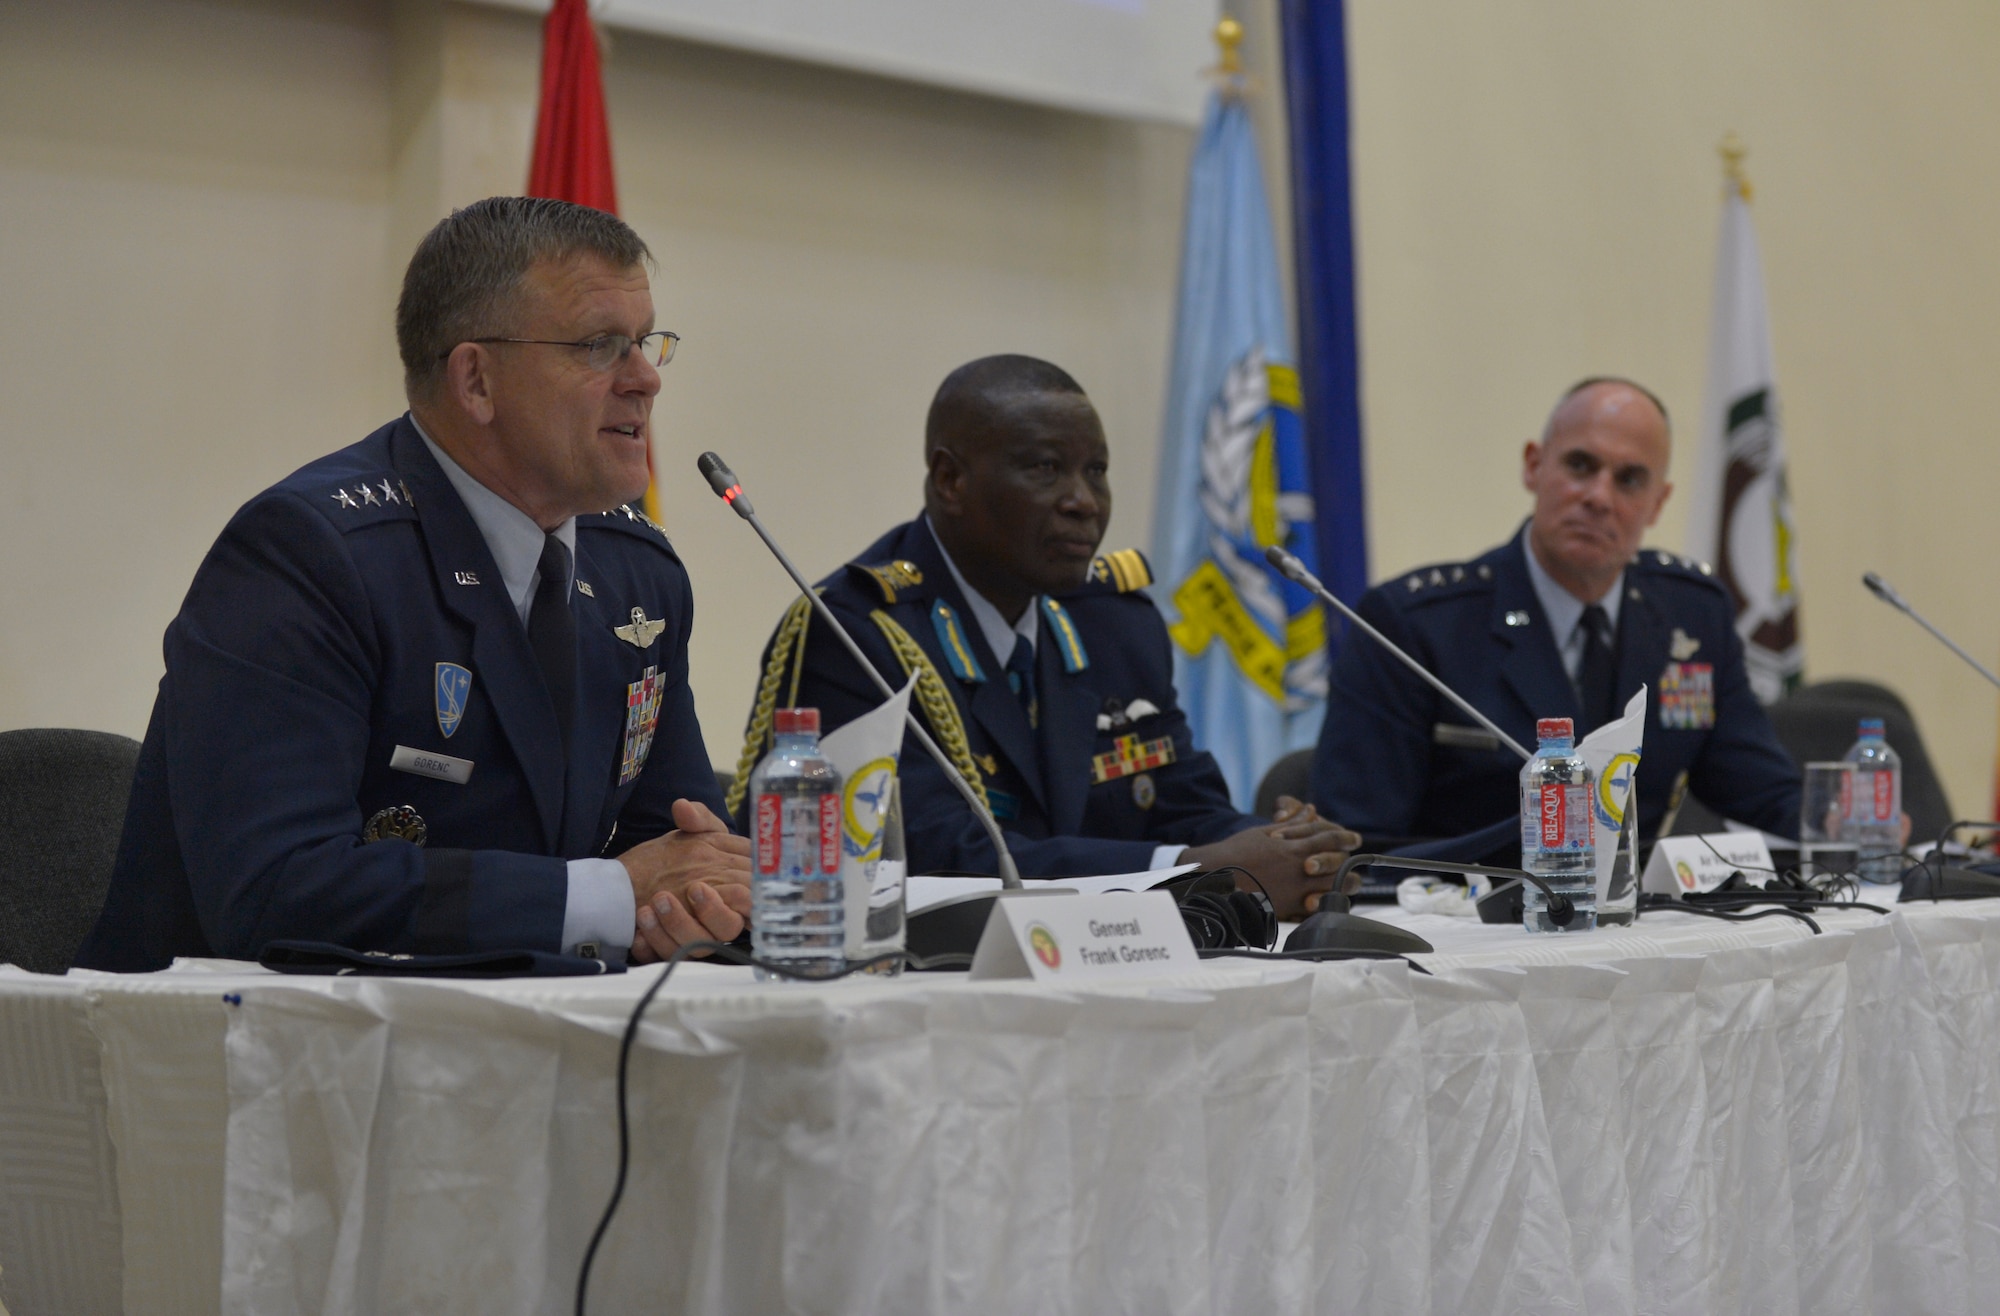 From left to right, Gen. Frank Gorenc, U.S. Air Forces in Europe and Air Forces Africa commander, Air Vice Marshal Michael Samson-Oje, Ghanaian chief of air staff, and Lt. Gen. Craig A. Franklin, 3rd Air Force commander, discuss the importance of regional cooperation with members of the local press in Africa, Aug. 20, 2013, Accra, Ghana. The Regional African Air Chiefs Symposium brings air chiefs together to discuss how their unique air capabilities can be collaborated to resolve regional issues.